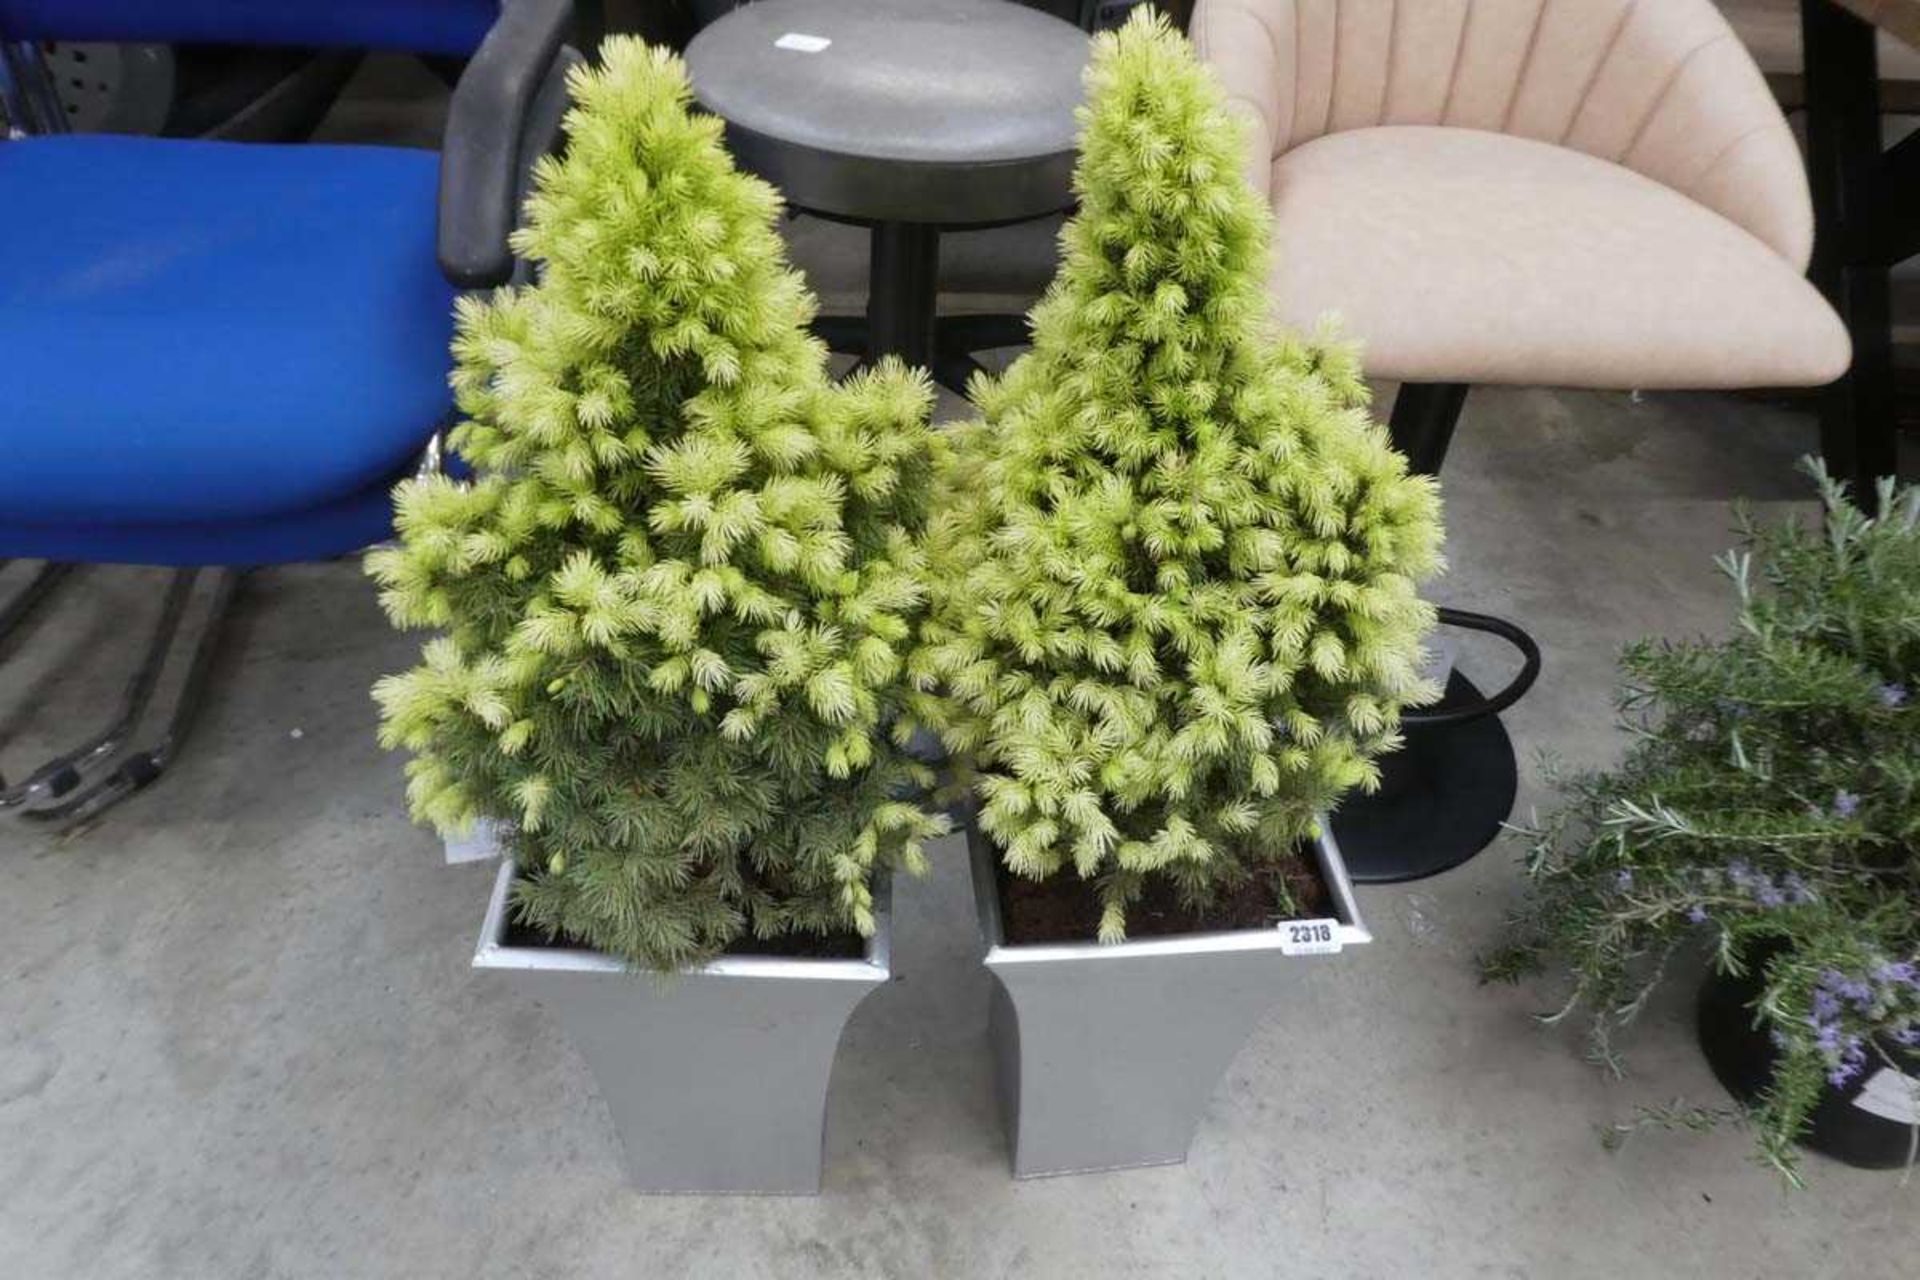 Pair of Picea (Daisy White) in planters